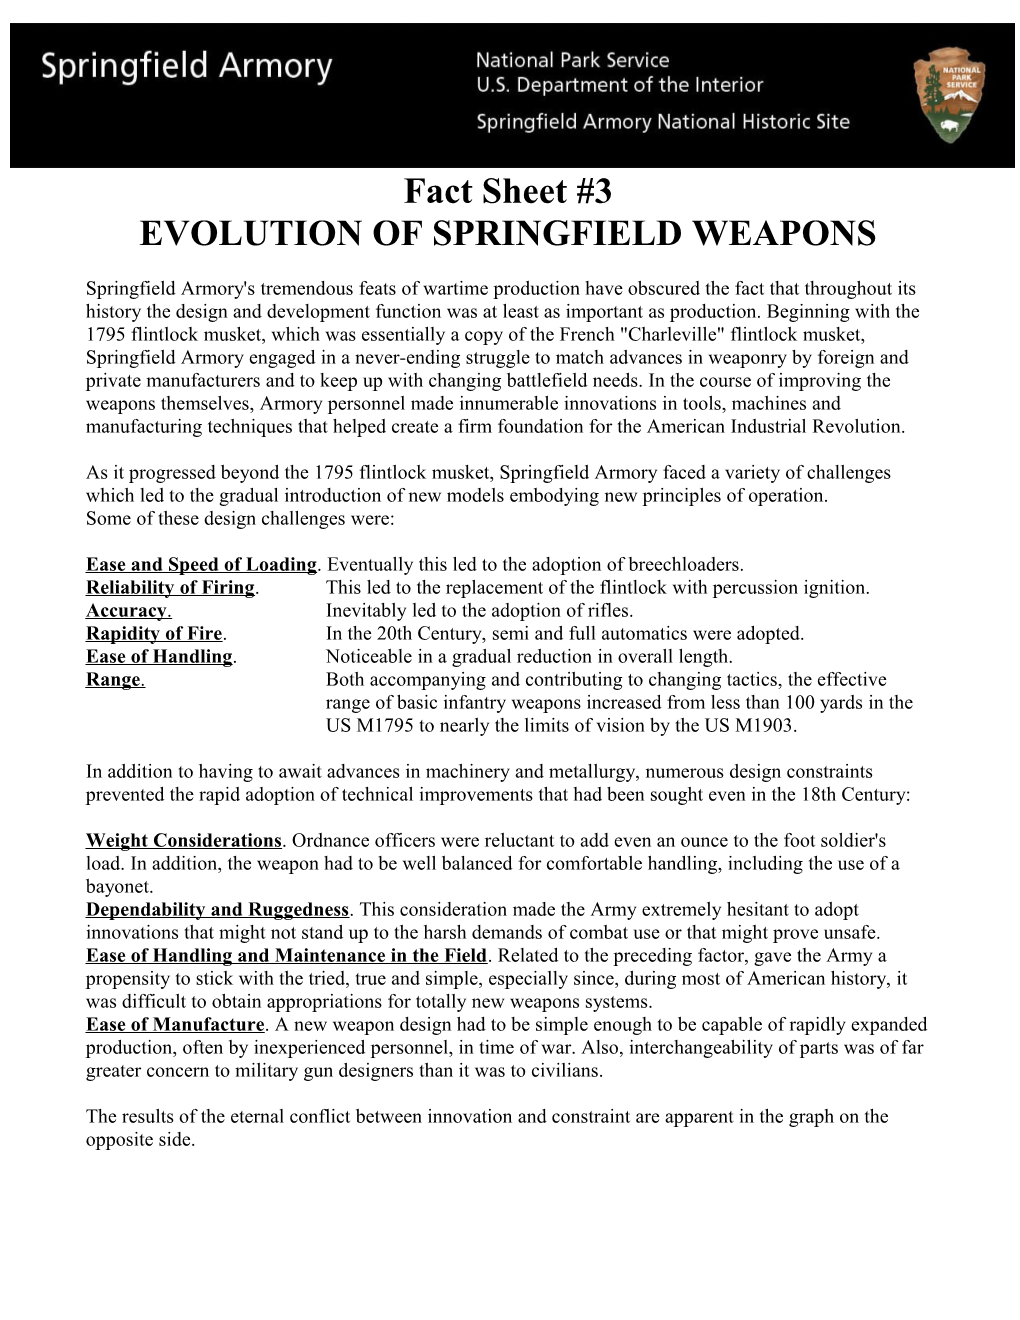 Evolution of Springfield Weapons